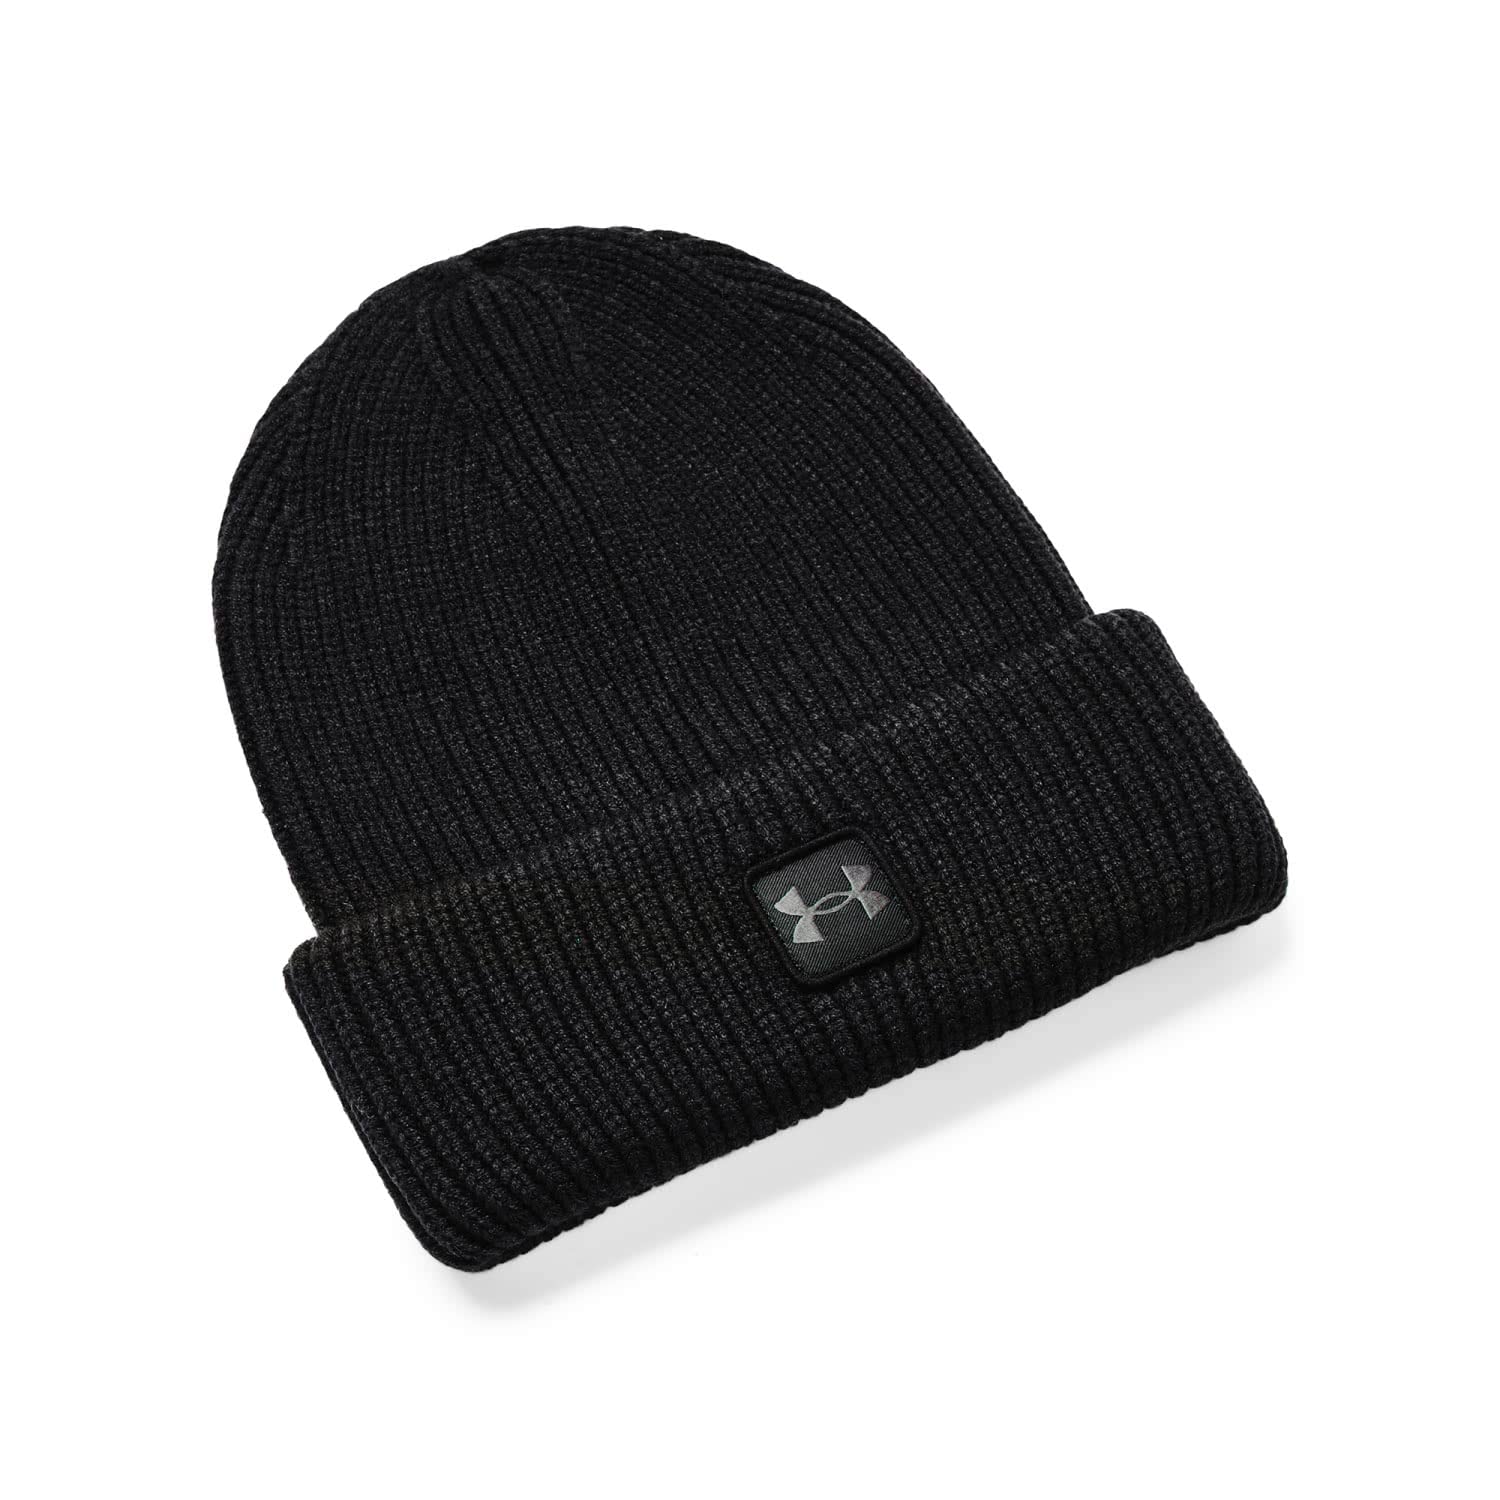 DICKS: Under Armour Men's Halftime Ribbed Beanie (Black) $9 + In Store Pickup